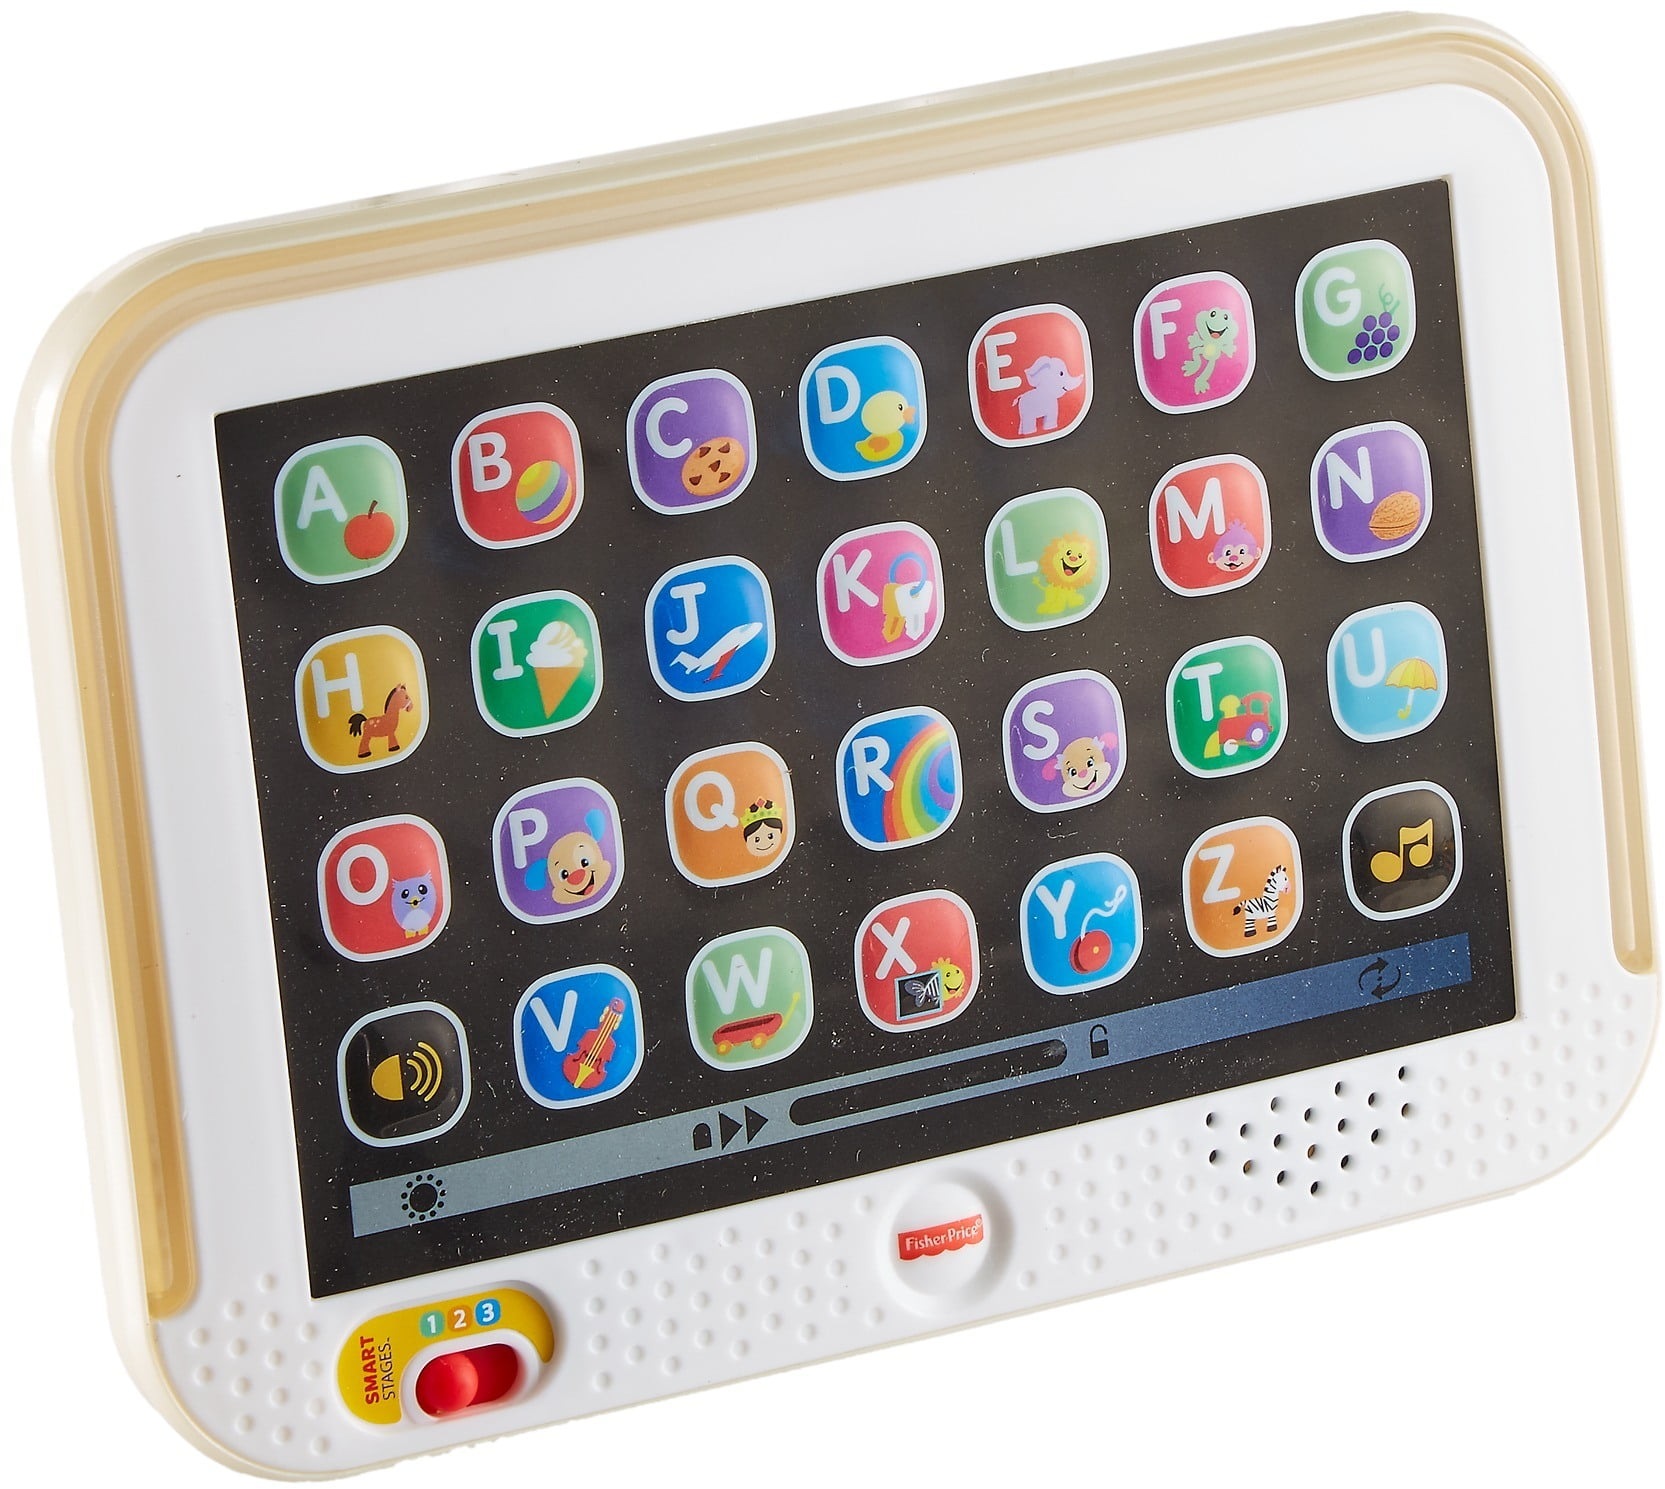 W8777 for sale online Fisher-Price Fun-2-Learn Smart Tablet 